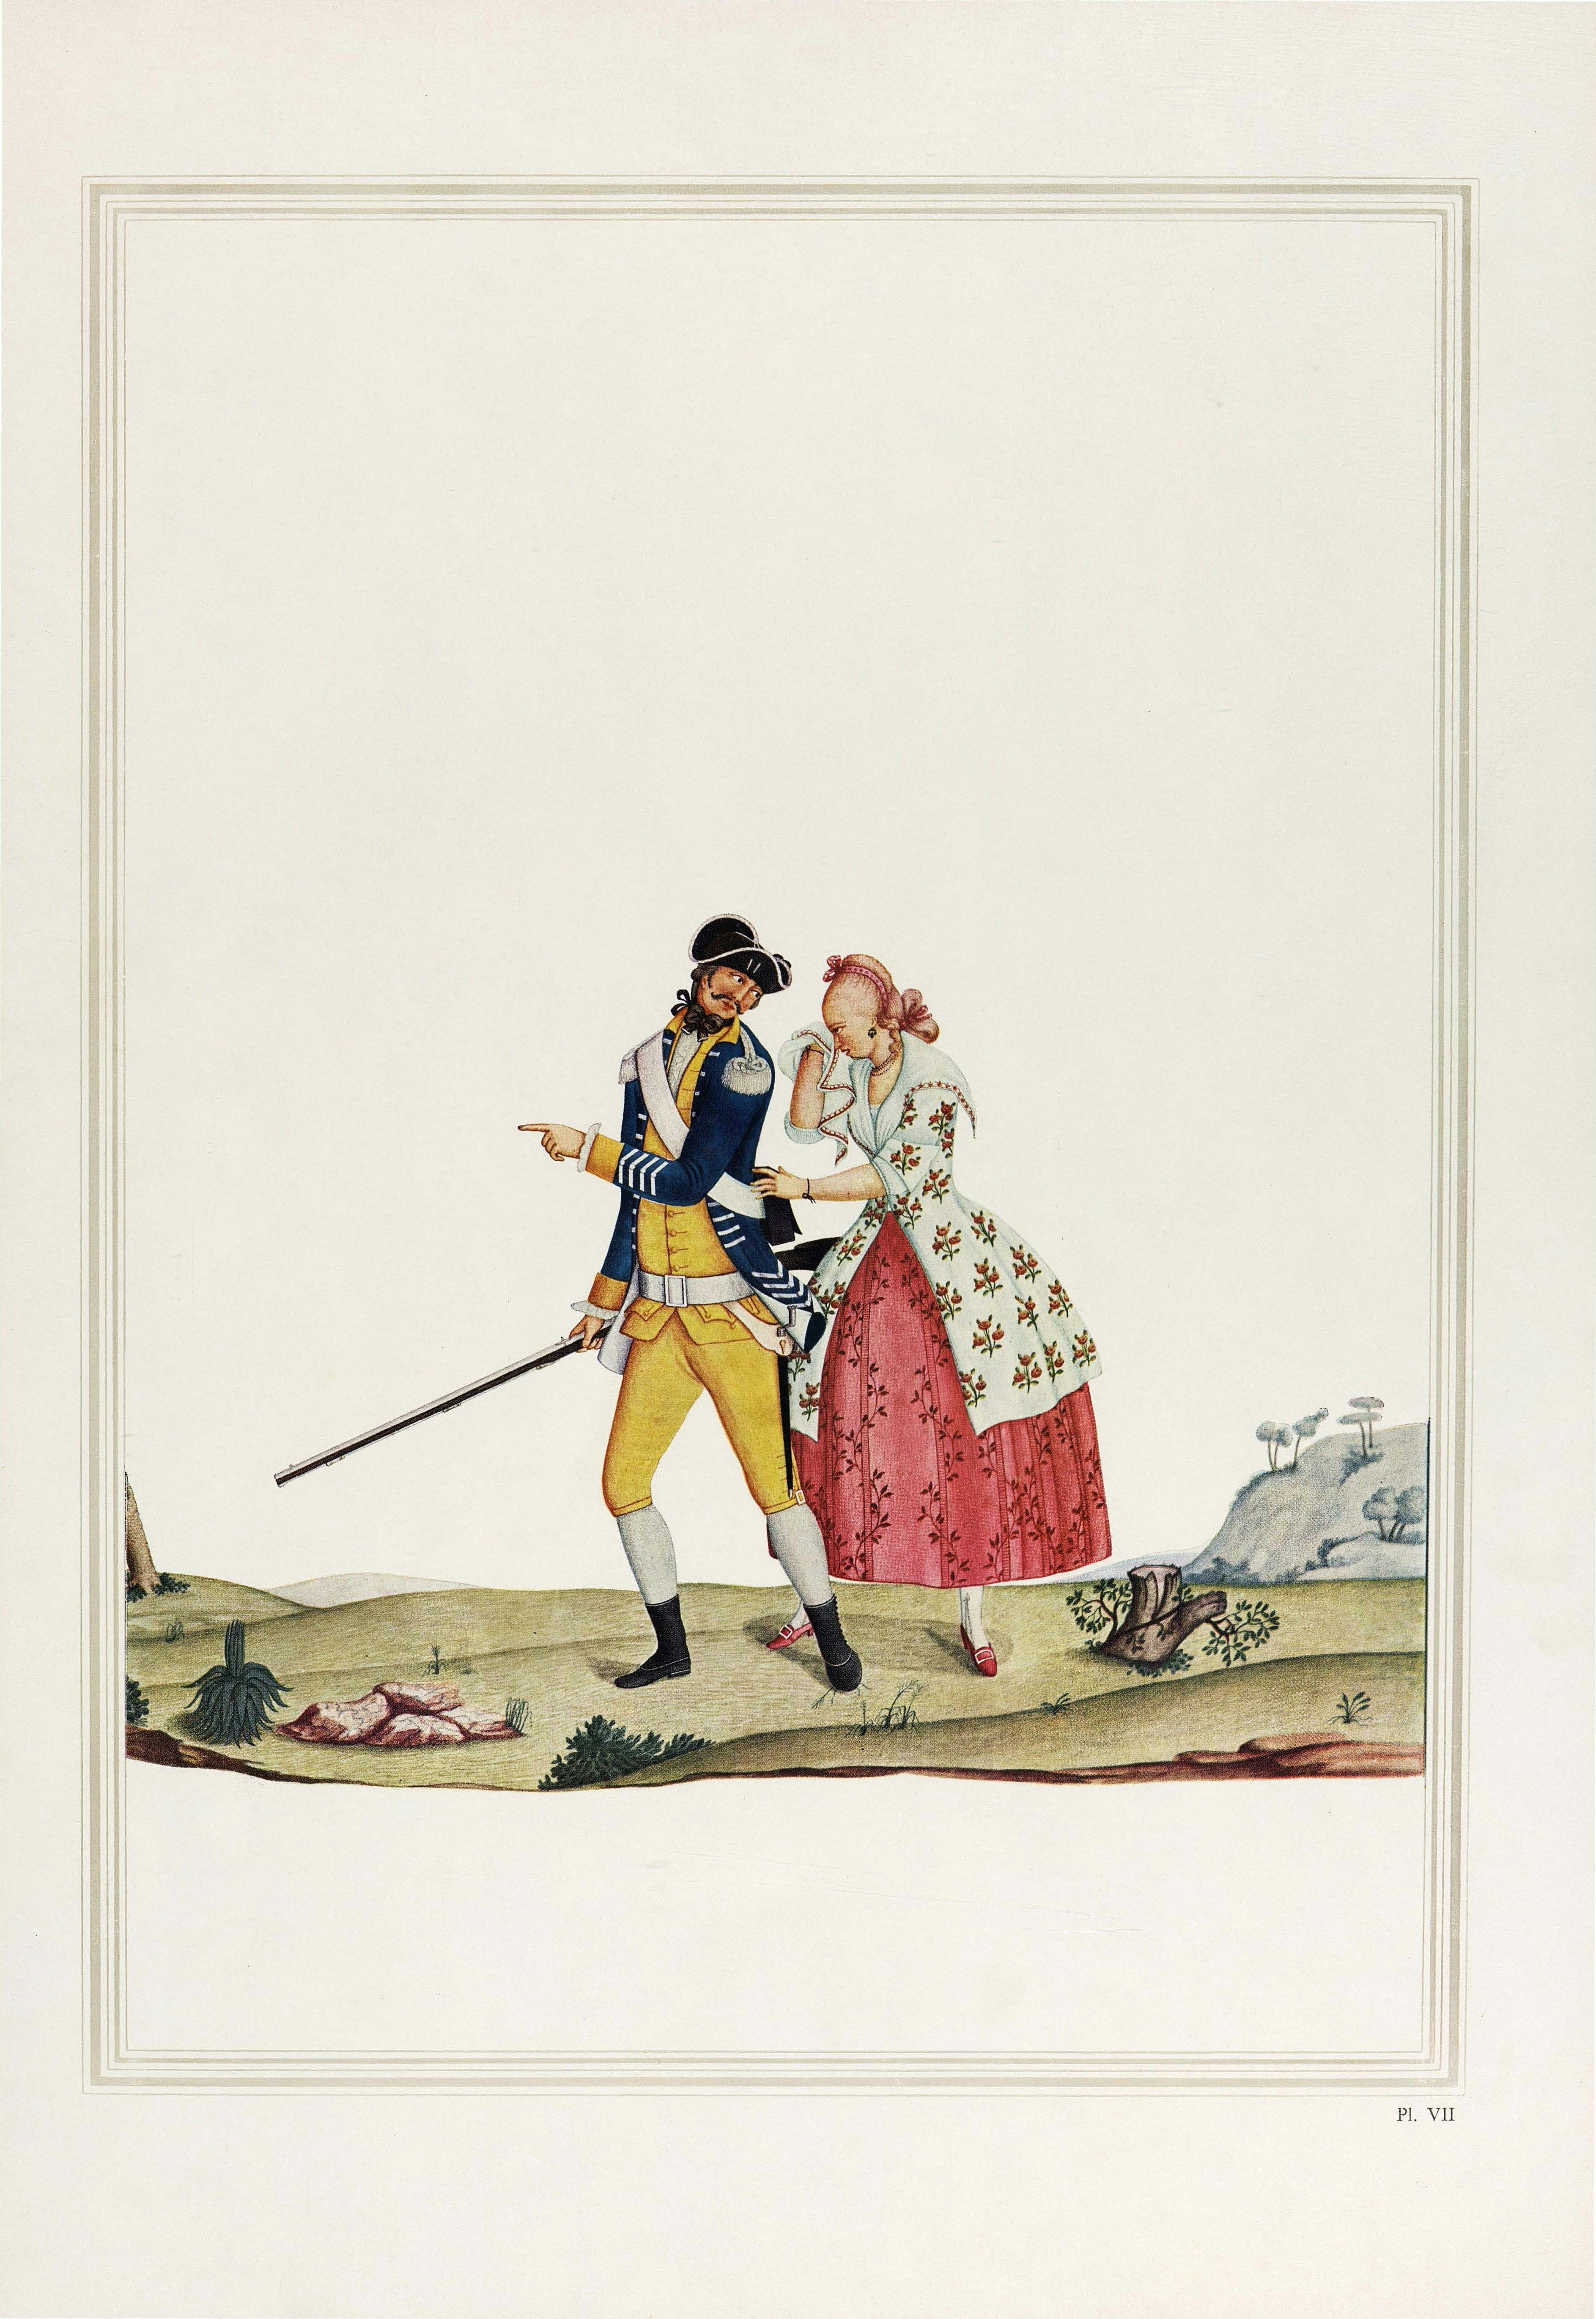 Romantic Scene: Soldier of the Moura Infantry Regiment bidding farewell to a crying girl, 1767, watercolour by Carlos Julião (1740-1811), source: National Library, Ministry of Education and Culture, Rio de Janeiro